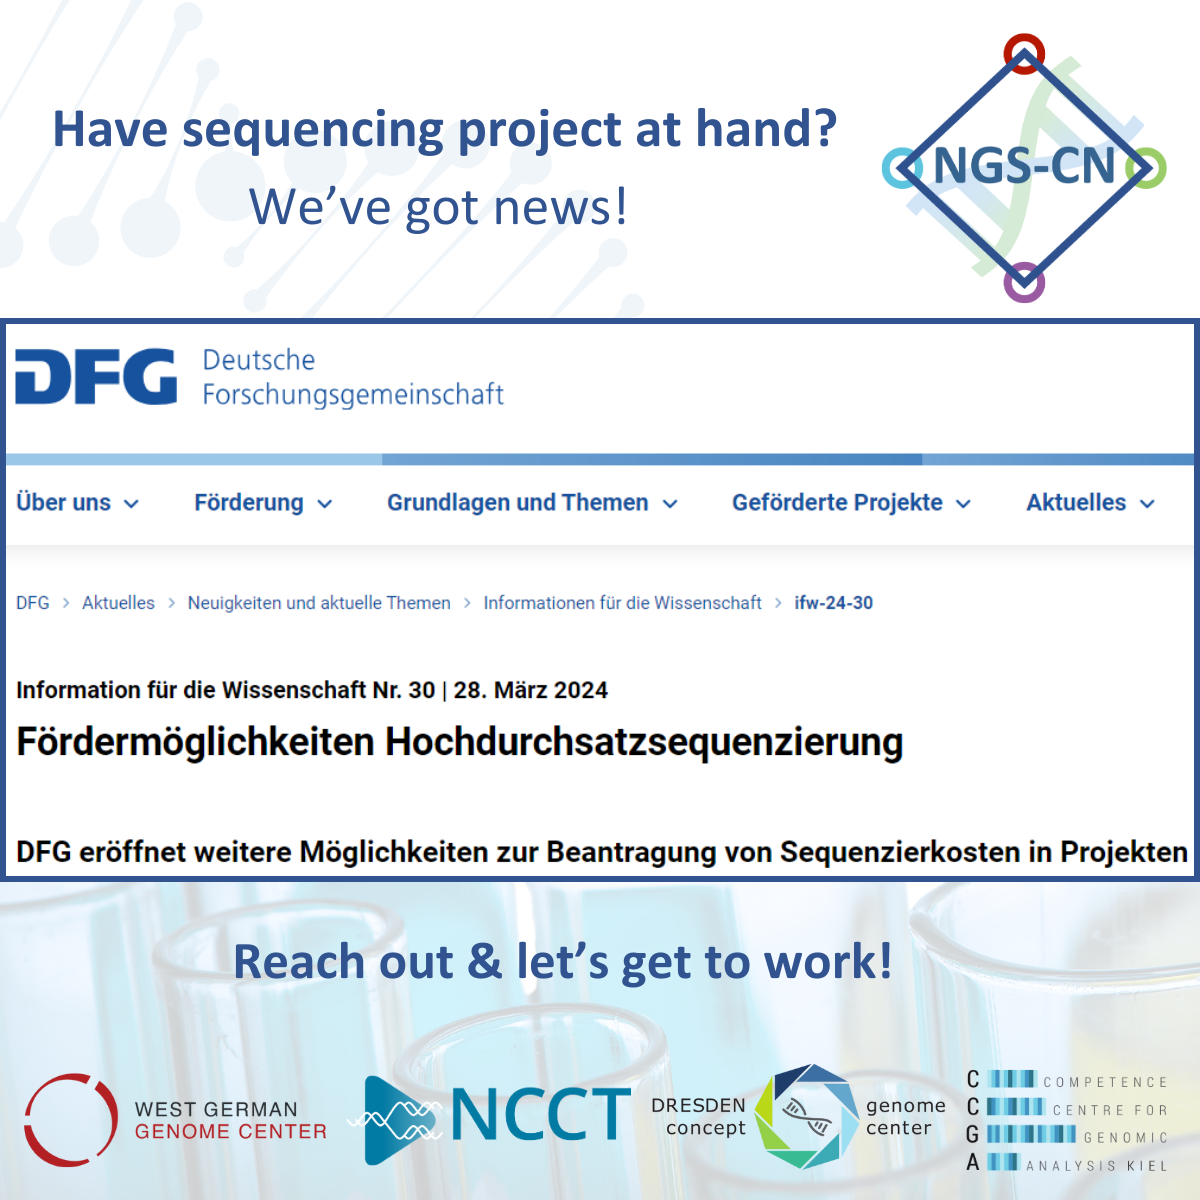 New funding opportunities for sequencing projects!